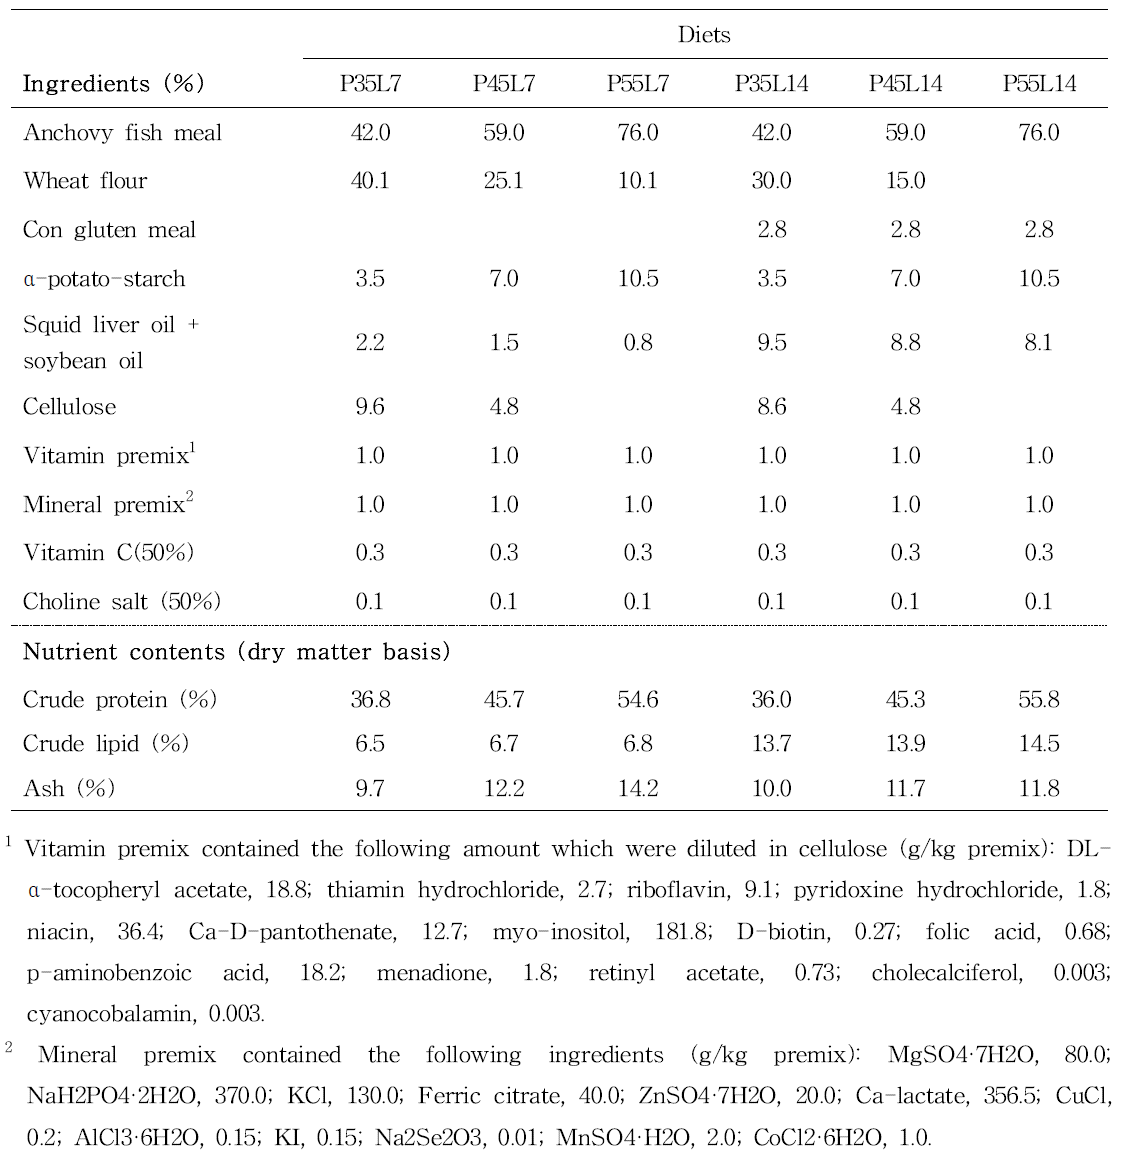 Ingredients and proximate composition (%) of the experimental diets